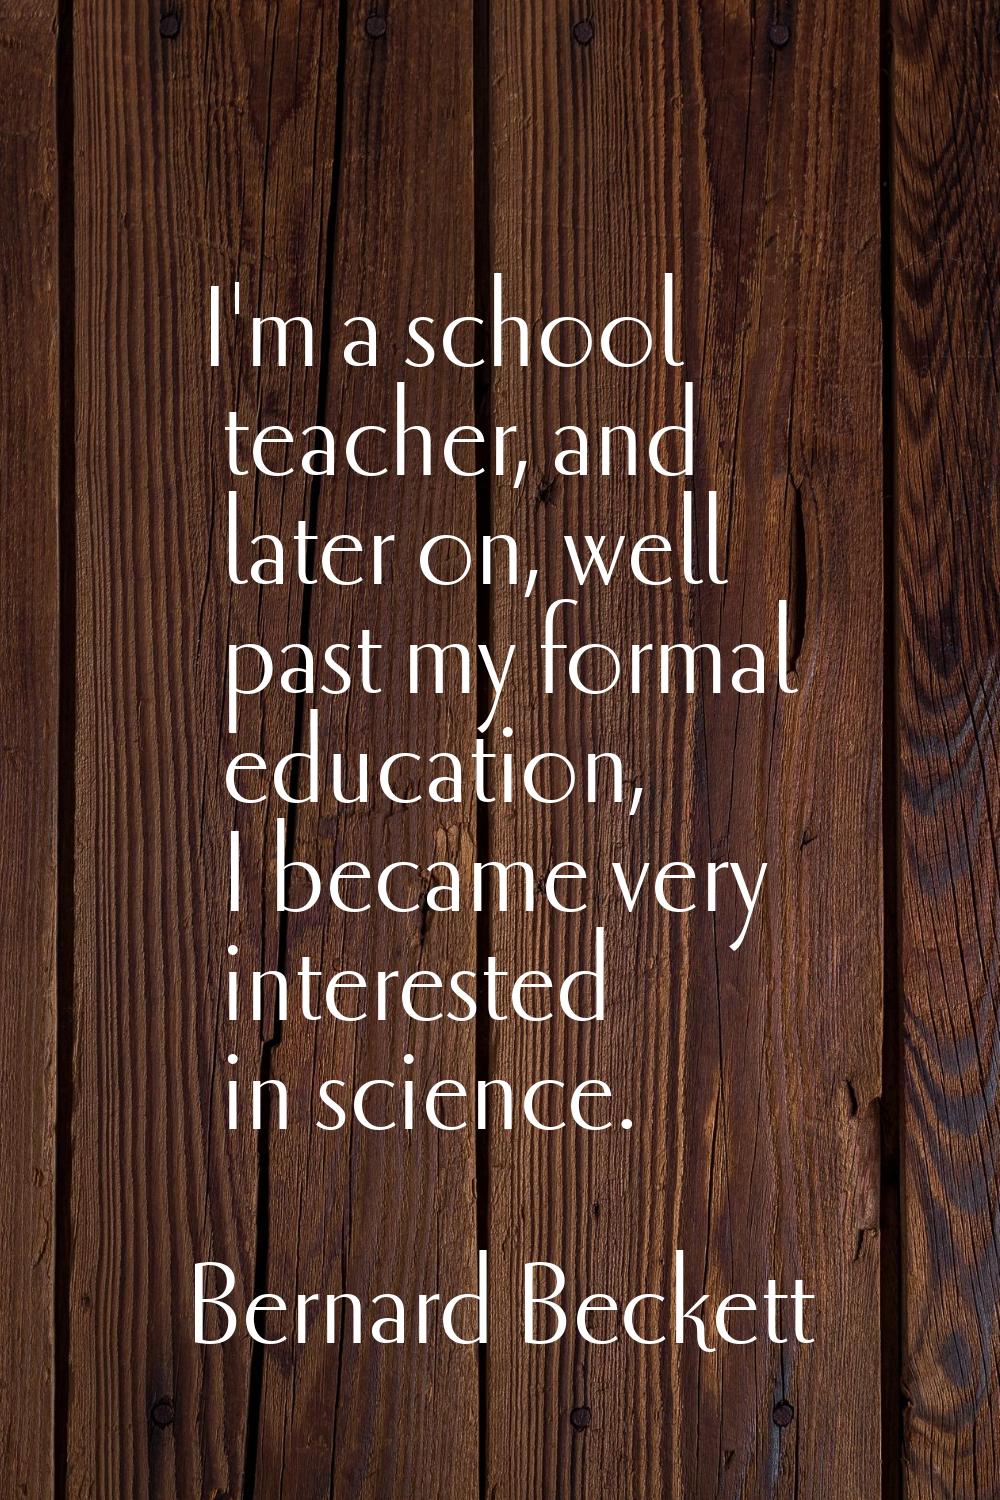 I'm a school teacher, and later on, well past my formal education, I became very interested in scie